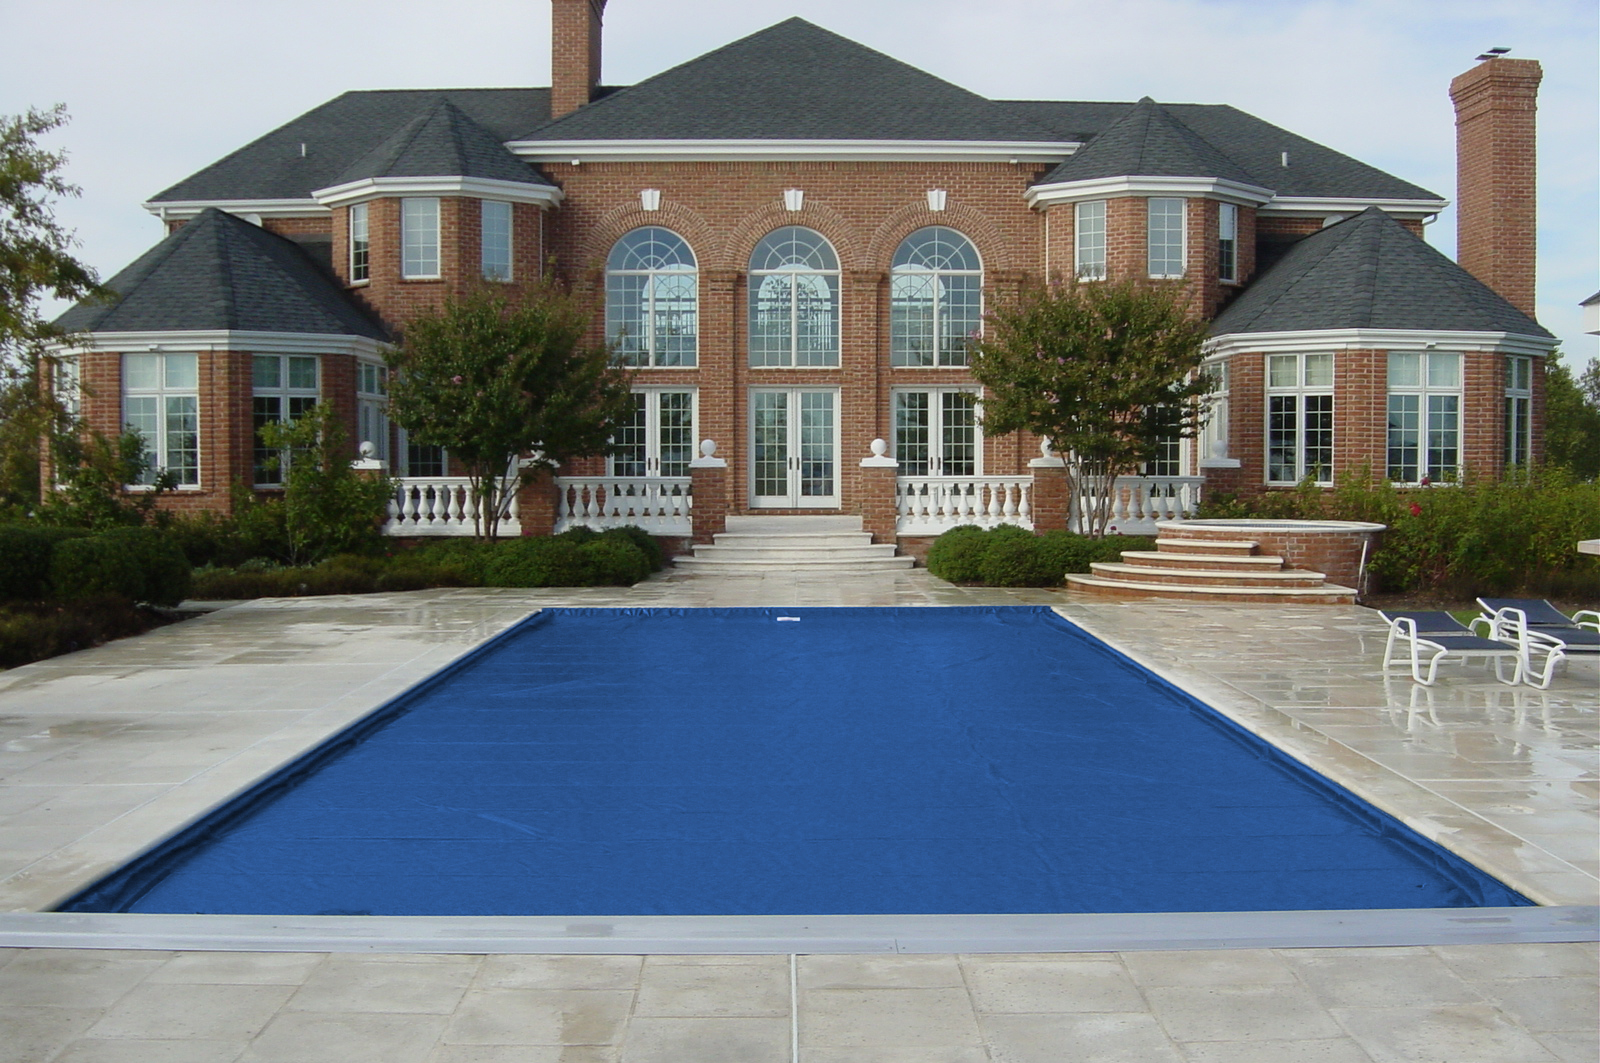 Cover-Pools Automatic Pool Covers - CoverSafe Automatic Pool Covers